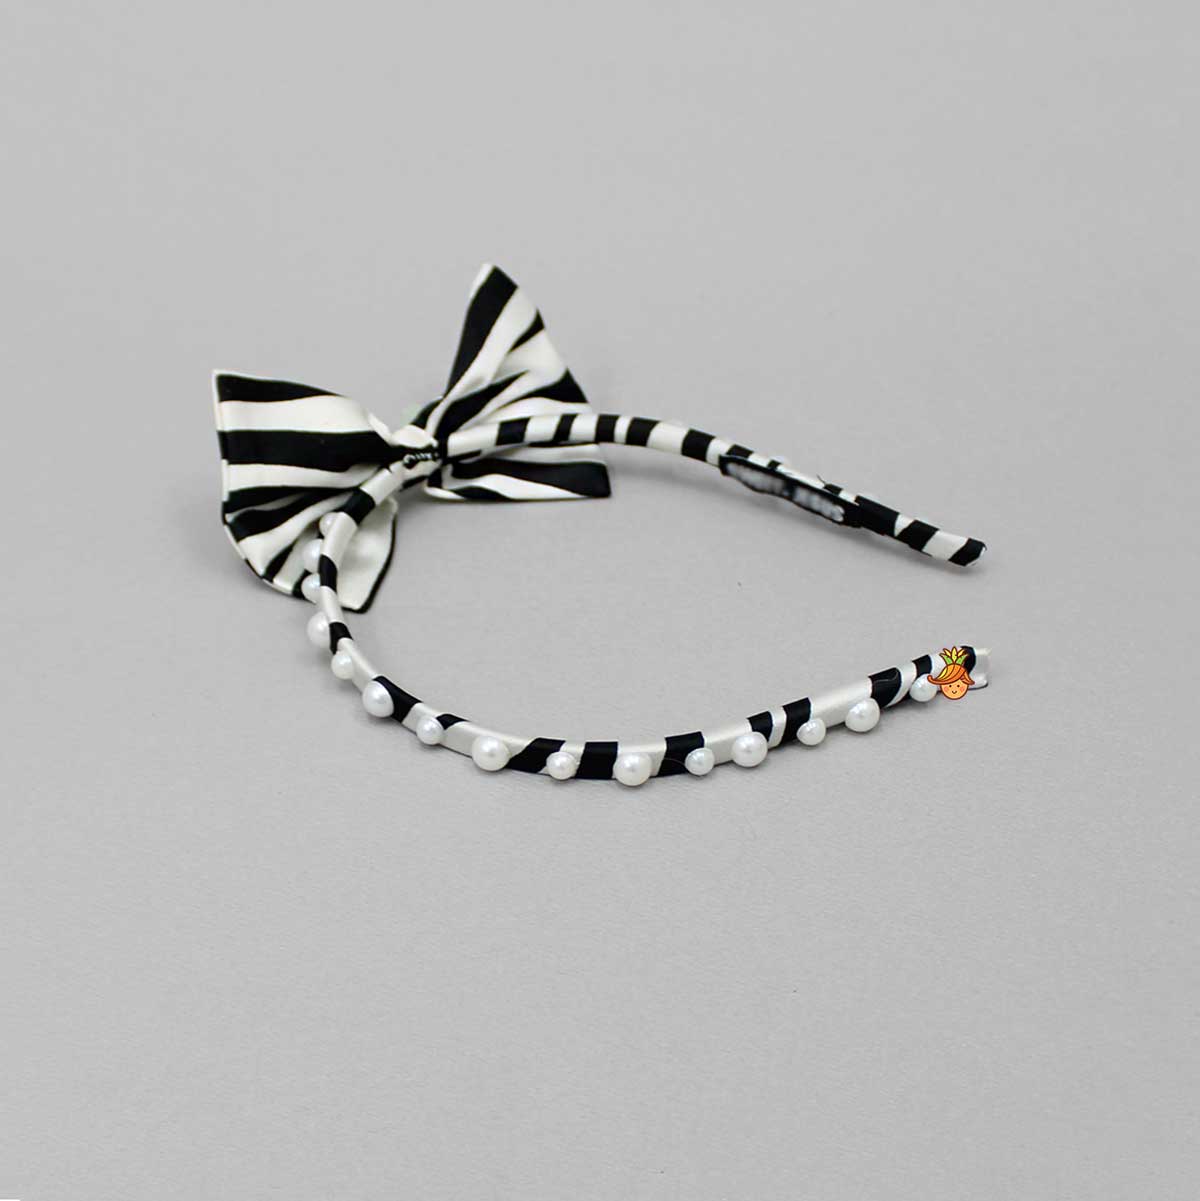 Exquisite Black And White Bowie Hairband